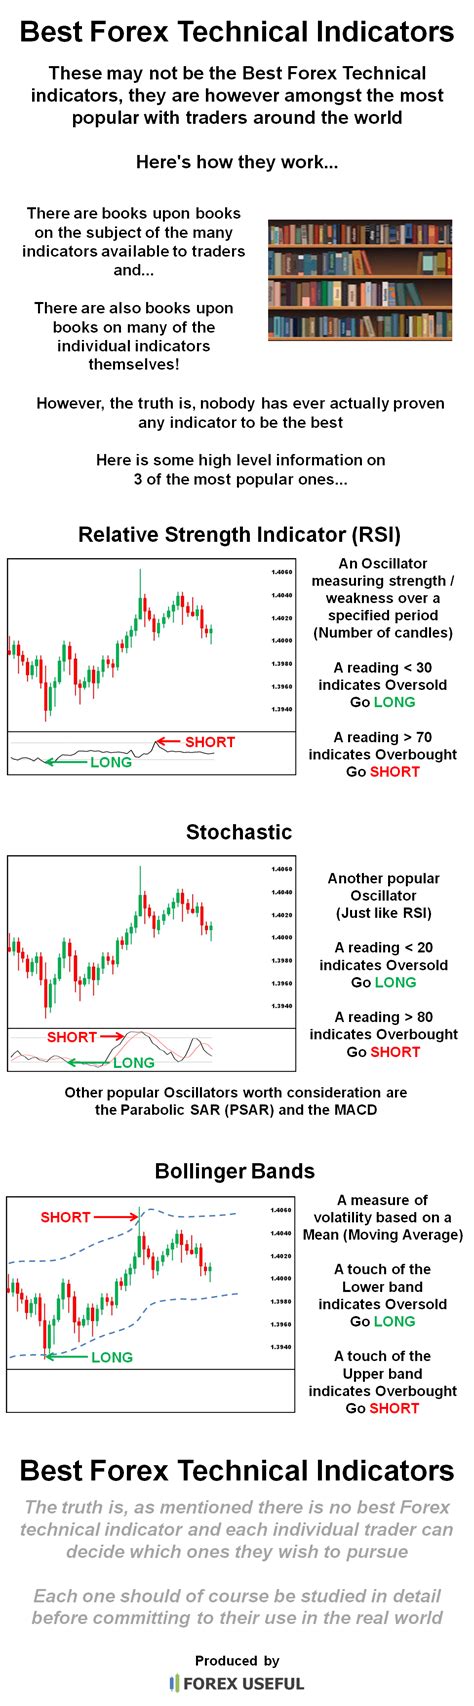 Best Forex Technical Indicators And How They Work — Forex Useful